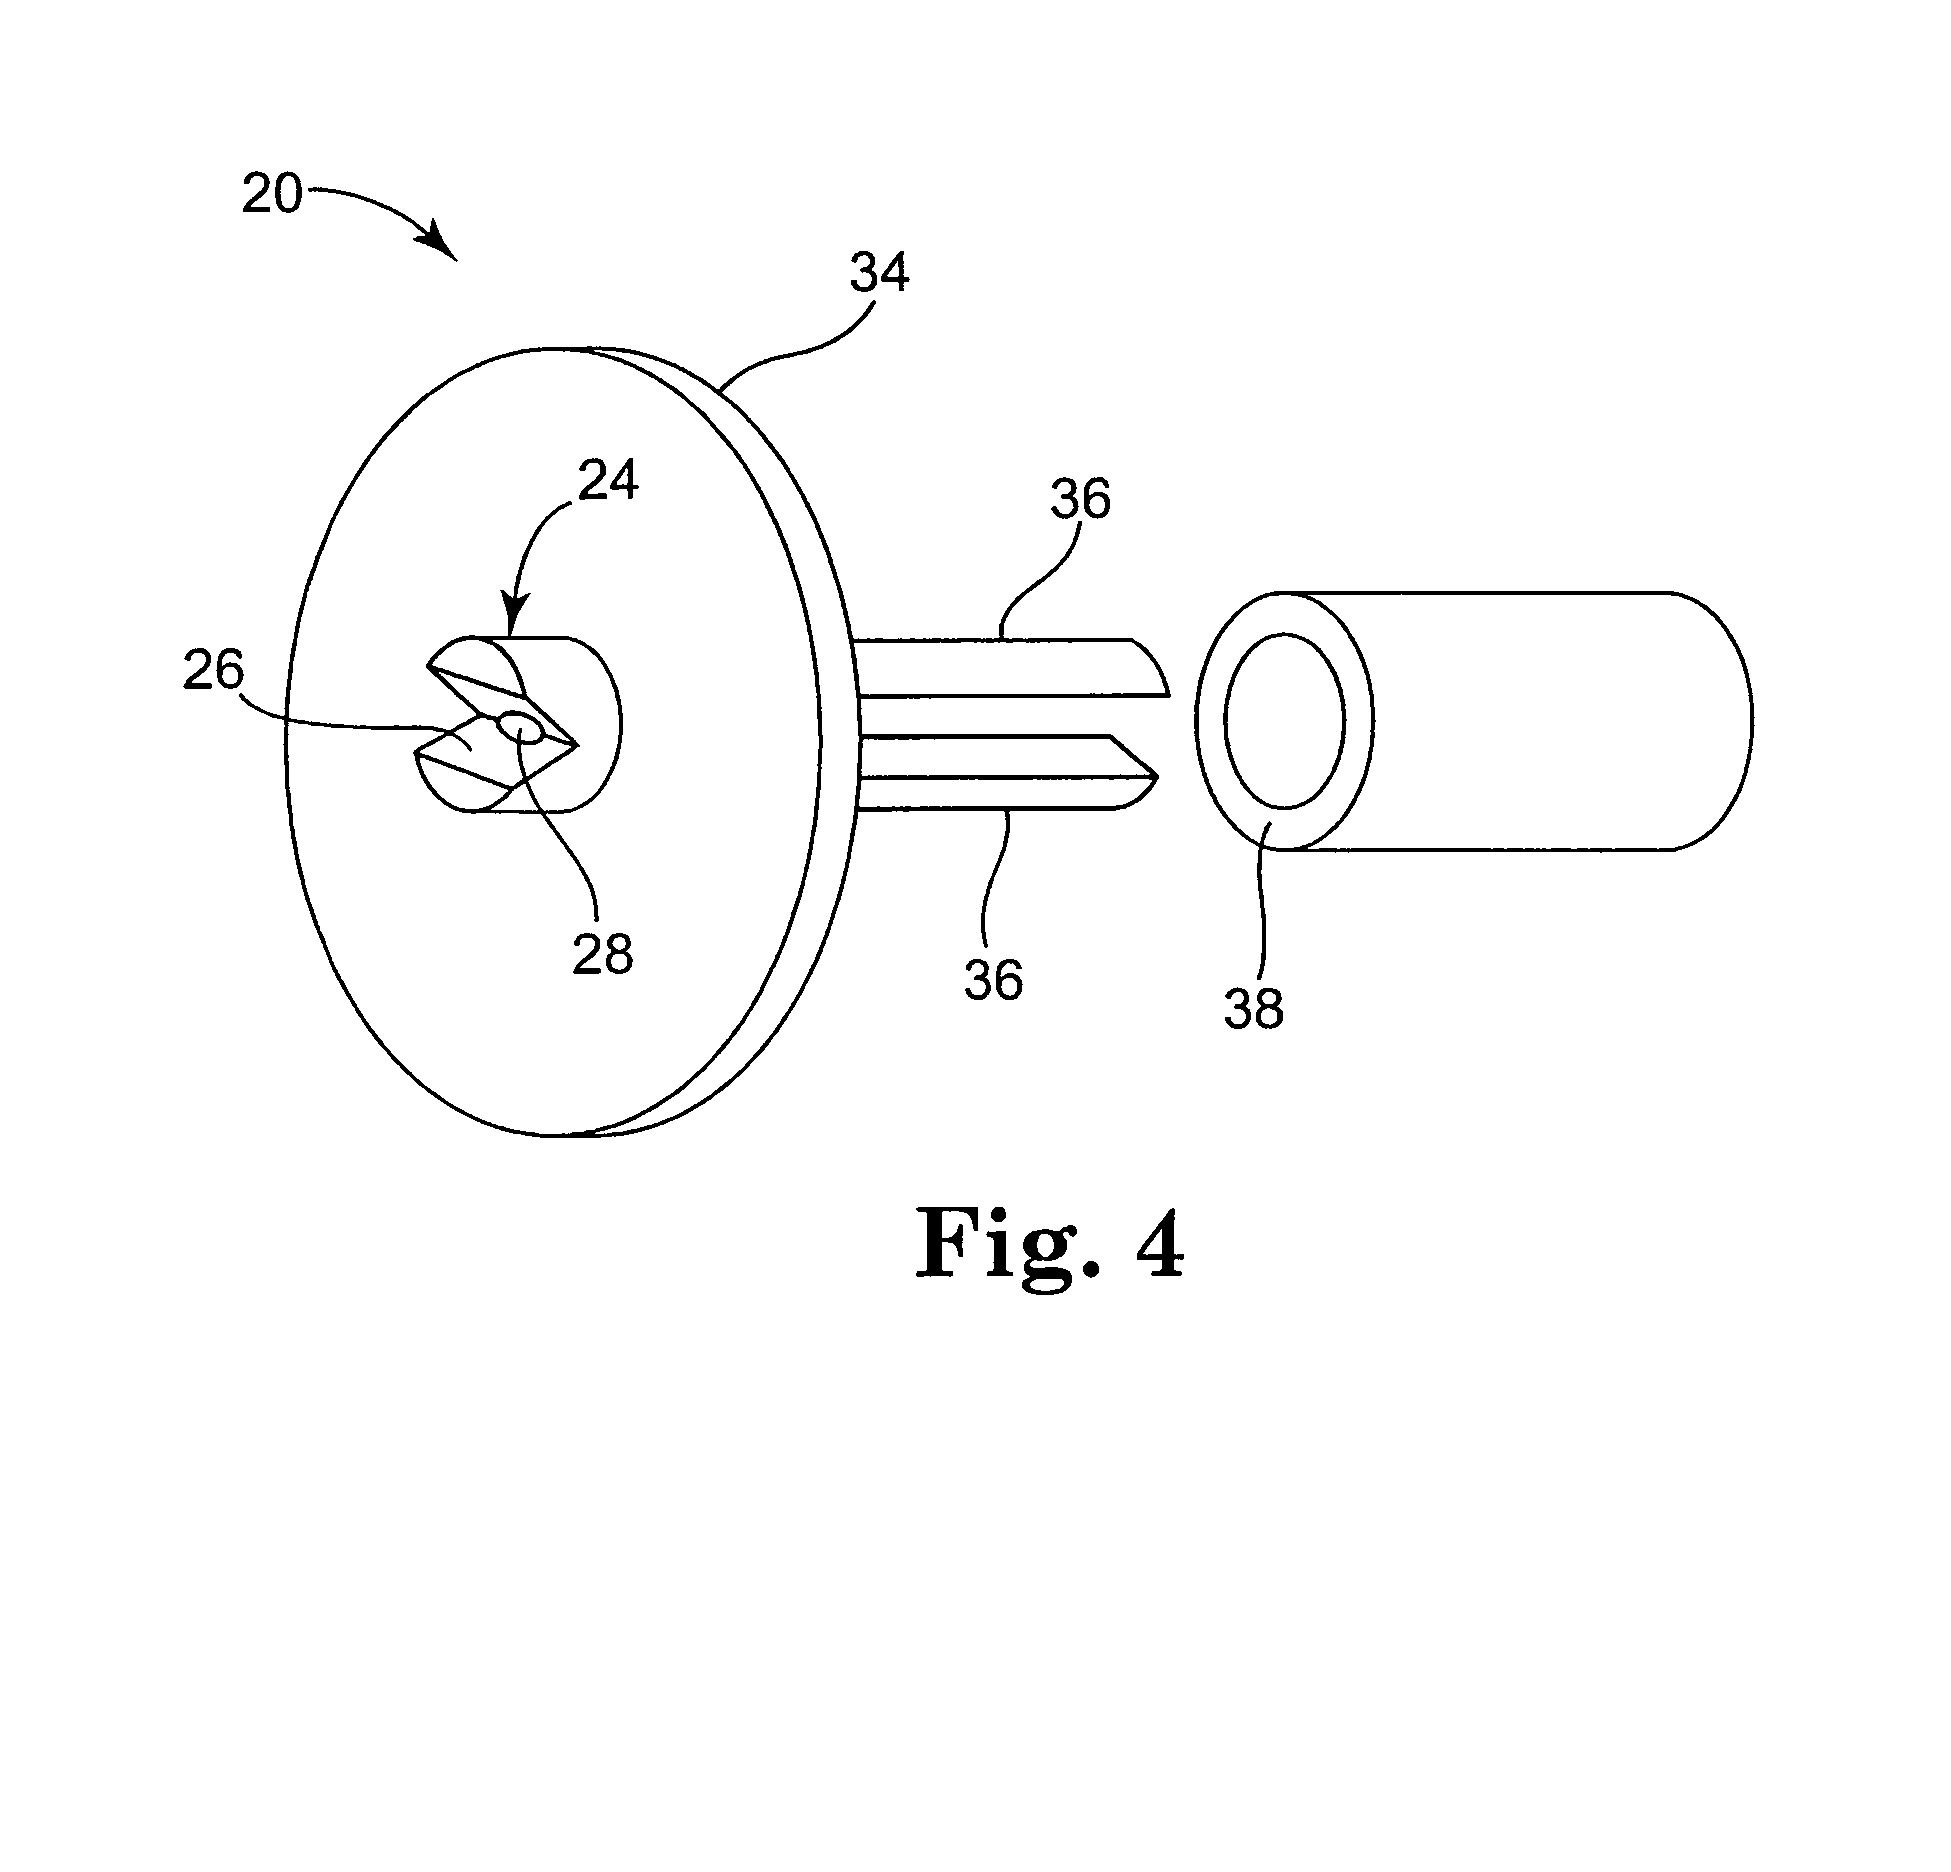 Nozzle with flow rate and droplet size control capability